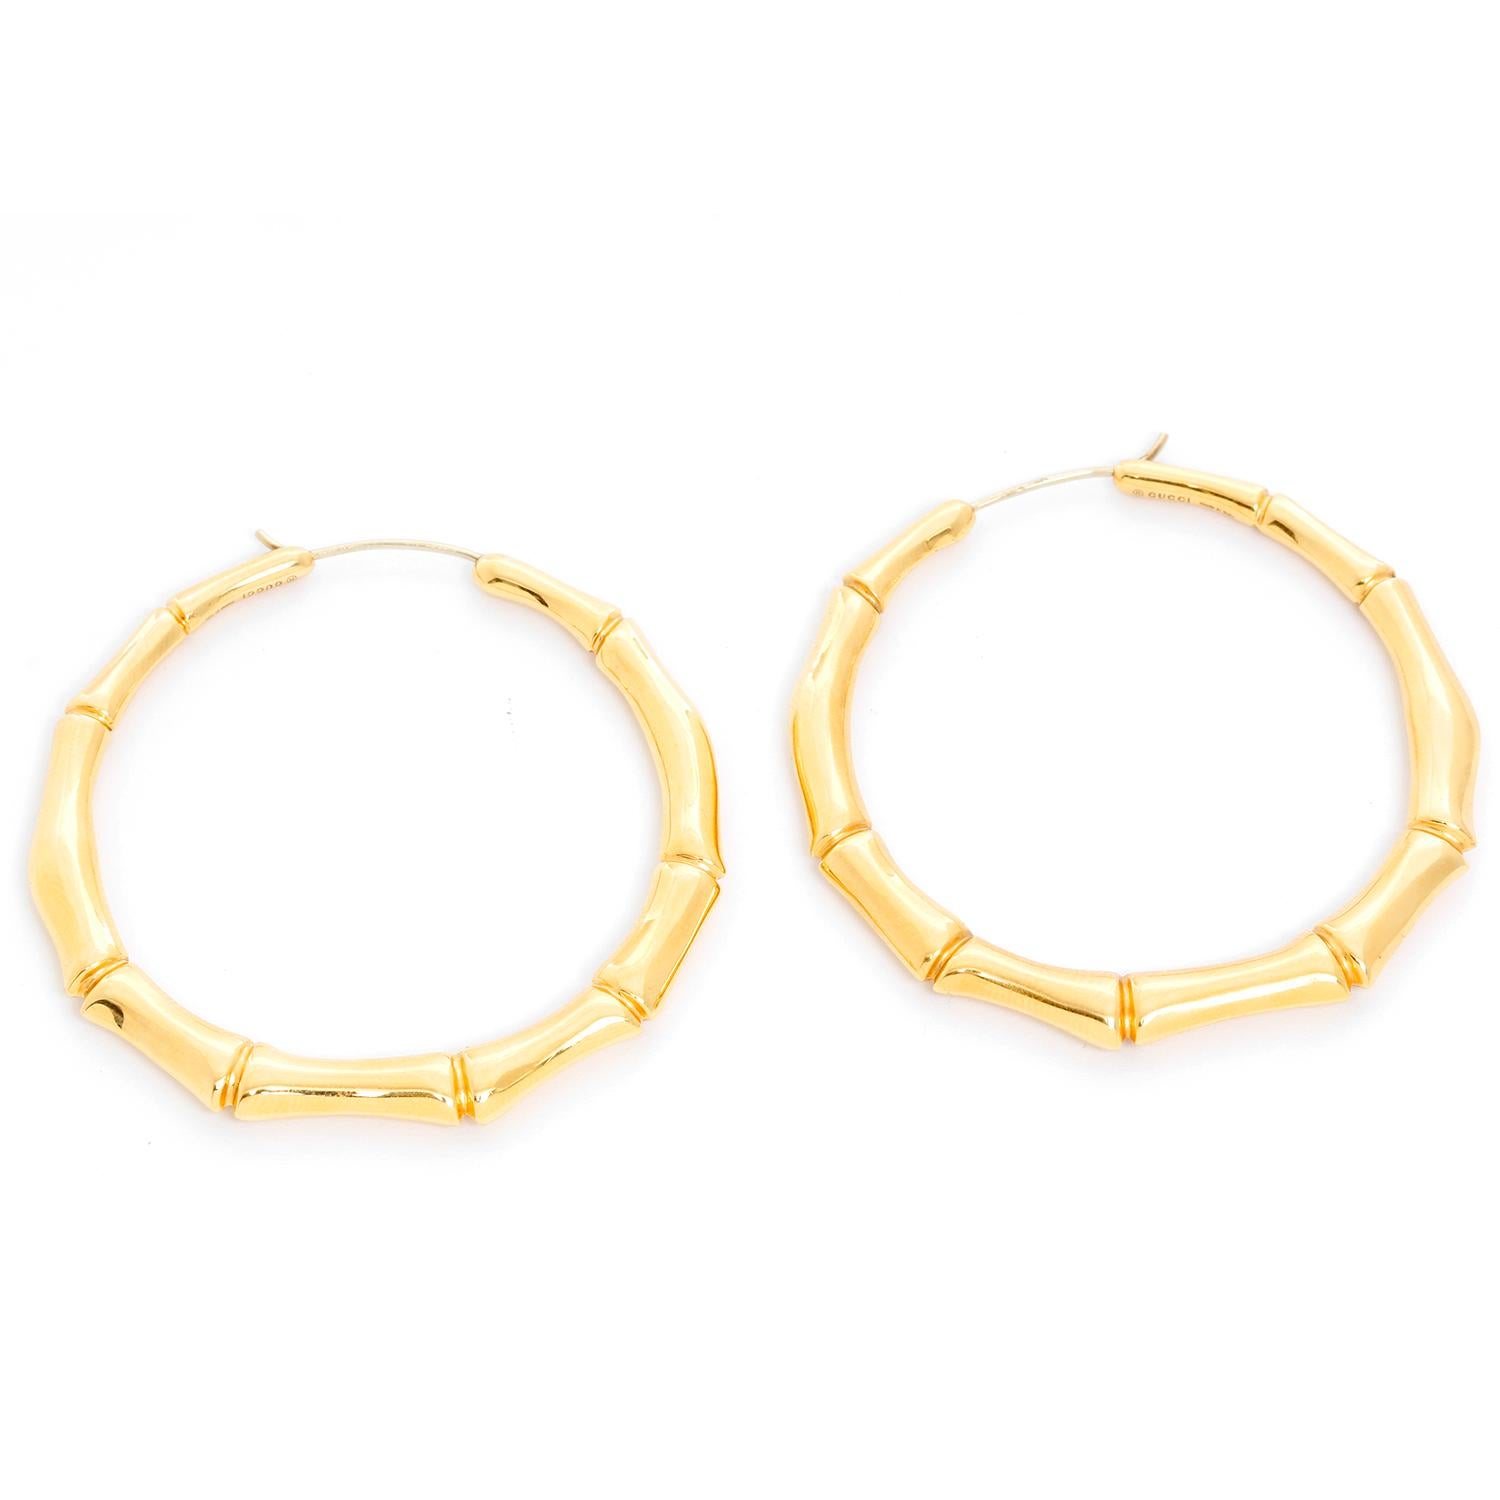 Gucci 18K Yellow Gold Bamboo Hoop Earrings  - The graceful form of the bamboo plant has been iconically interpreted by the House of Gucci in these 18K yellow gold hoops. Pre-owned with Gucci box. Length 2.2 inches. Weight 18 grams. 